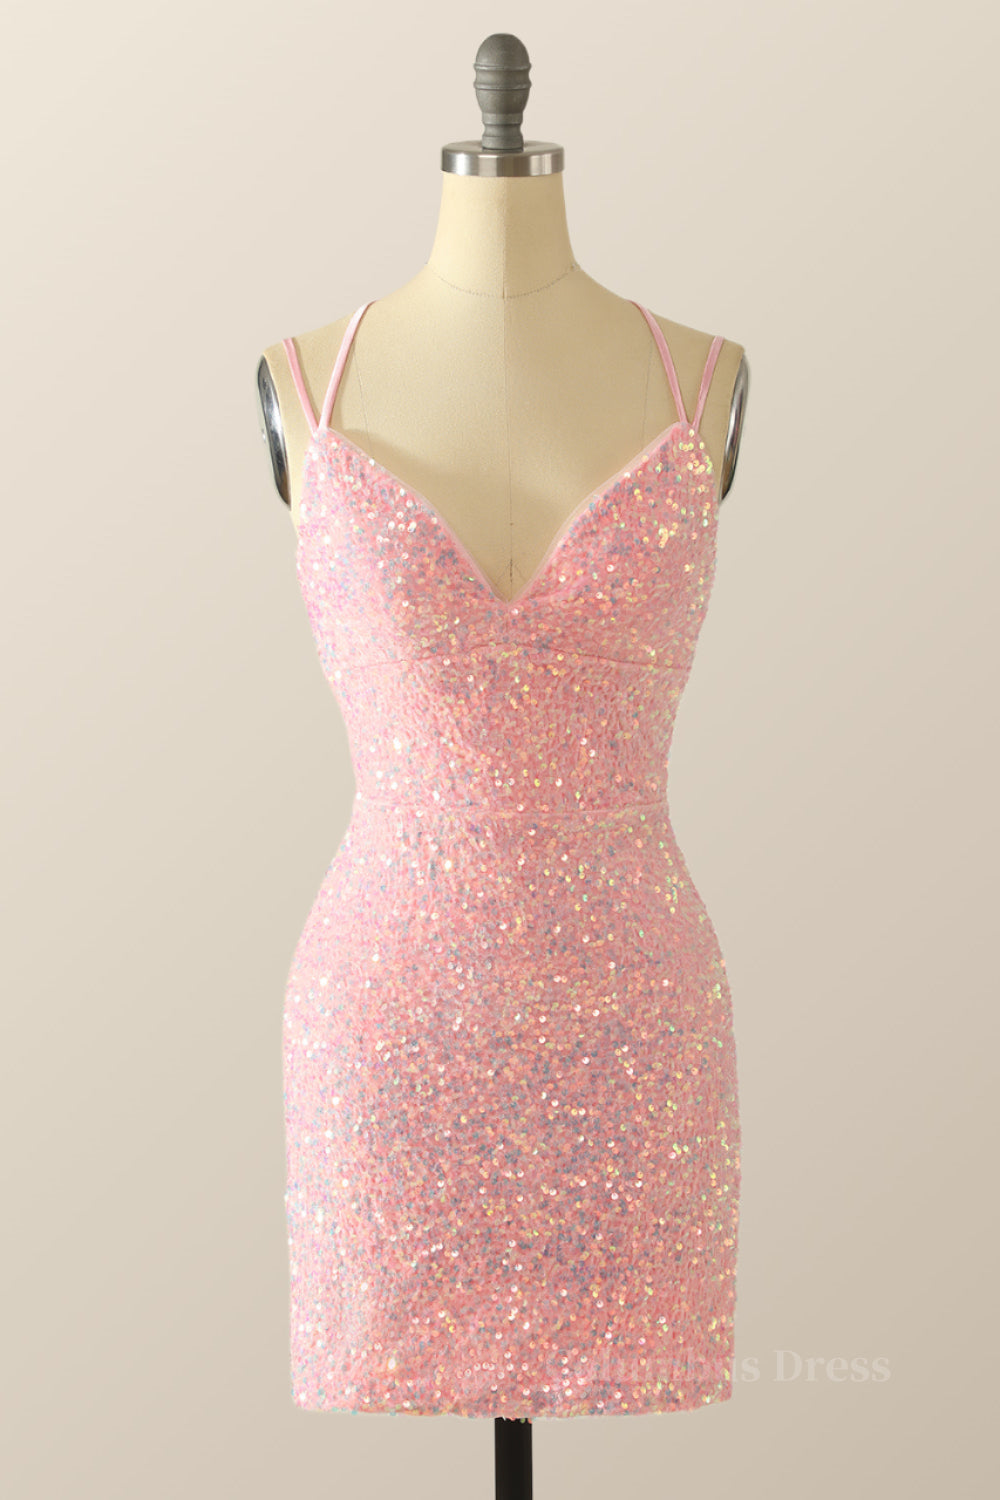 Homecoming Dresses Pockets, Double Straps Pink Sequin Bodycon Mini Dress